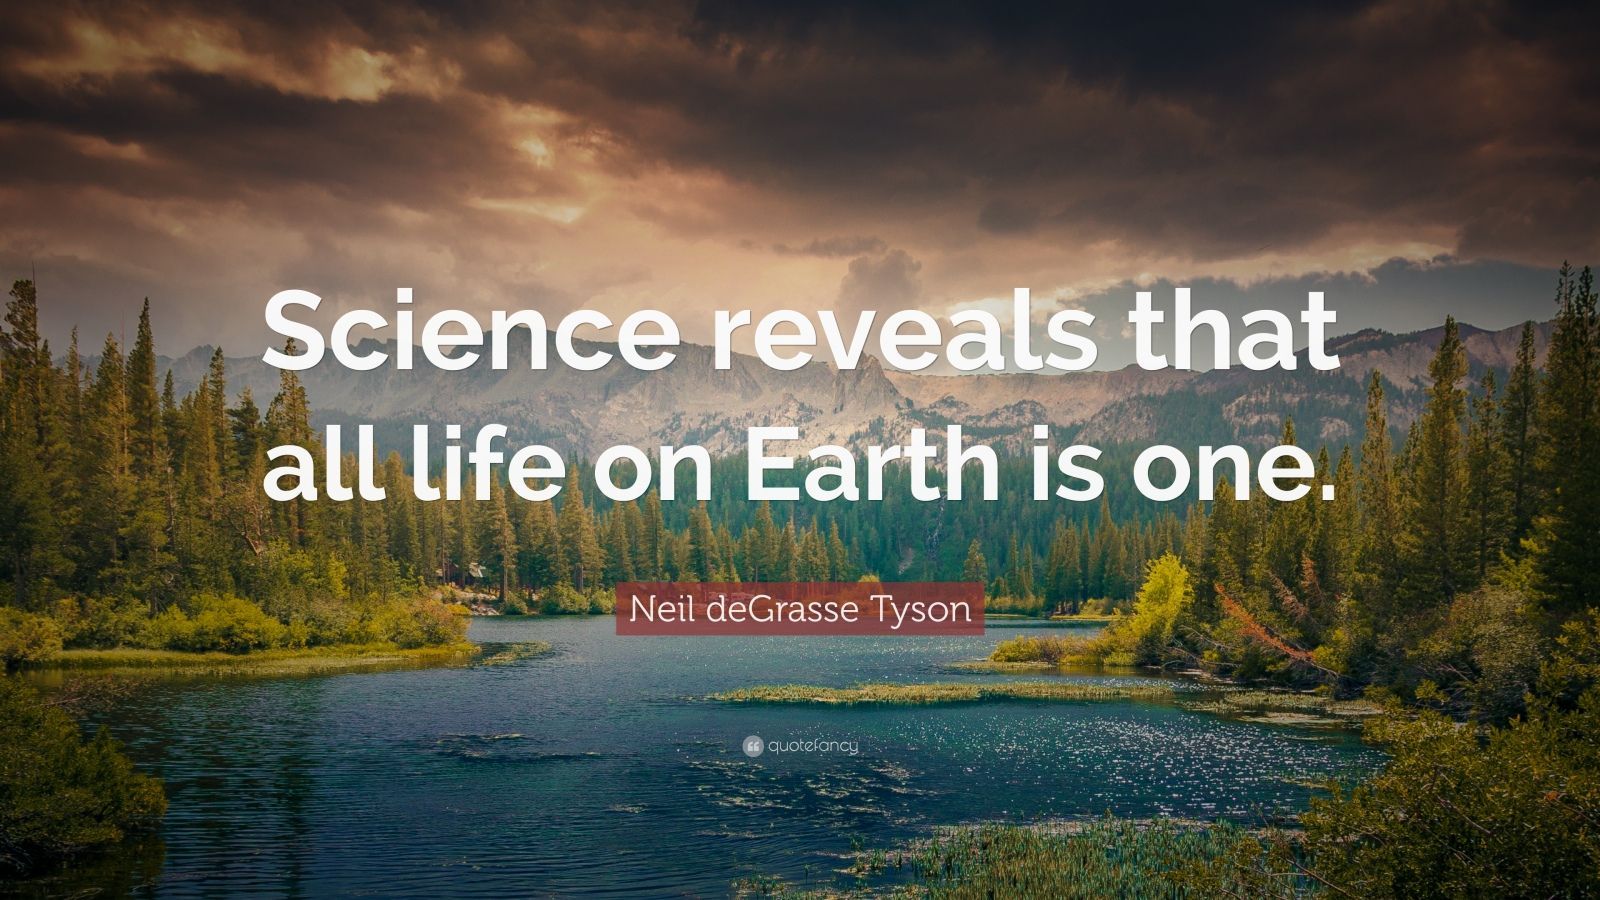 Neil deGrasse Tyson Quote: “Science reveals that all life on Earth is one.” (12 wallpaper)